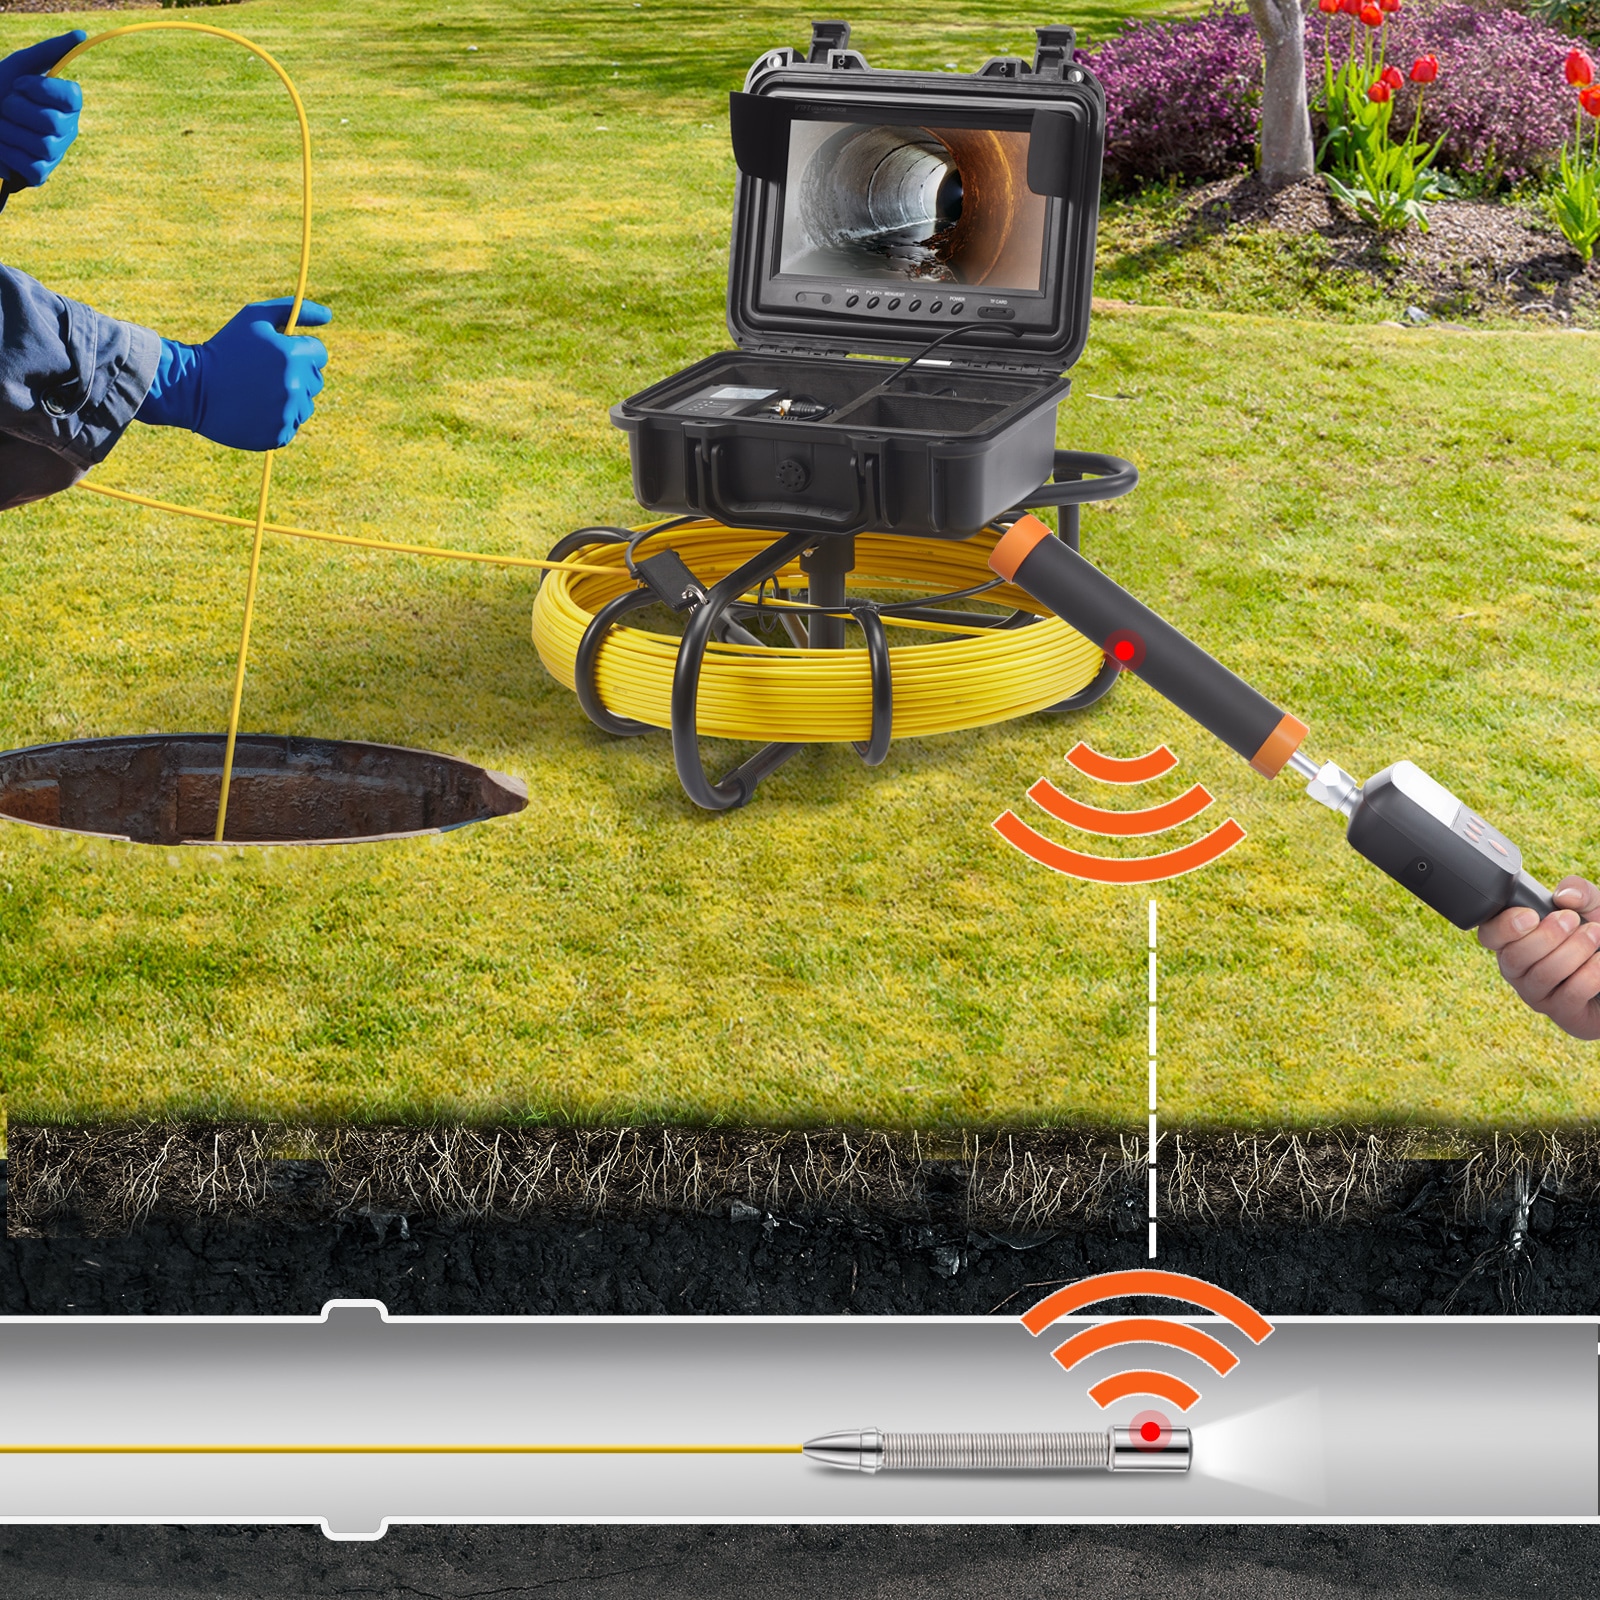 2MRCPTZ-30200 Sewer Video Pipe Drain Cleaner Inspection Camera